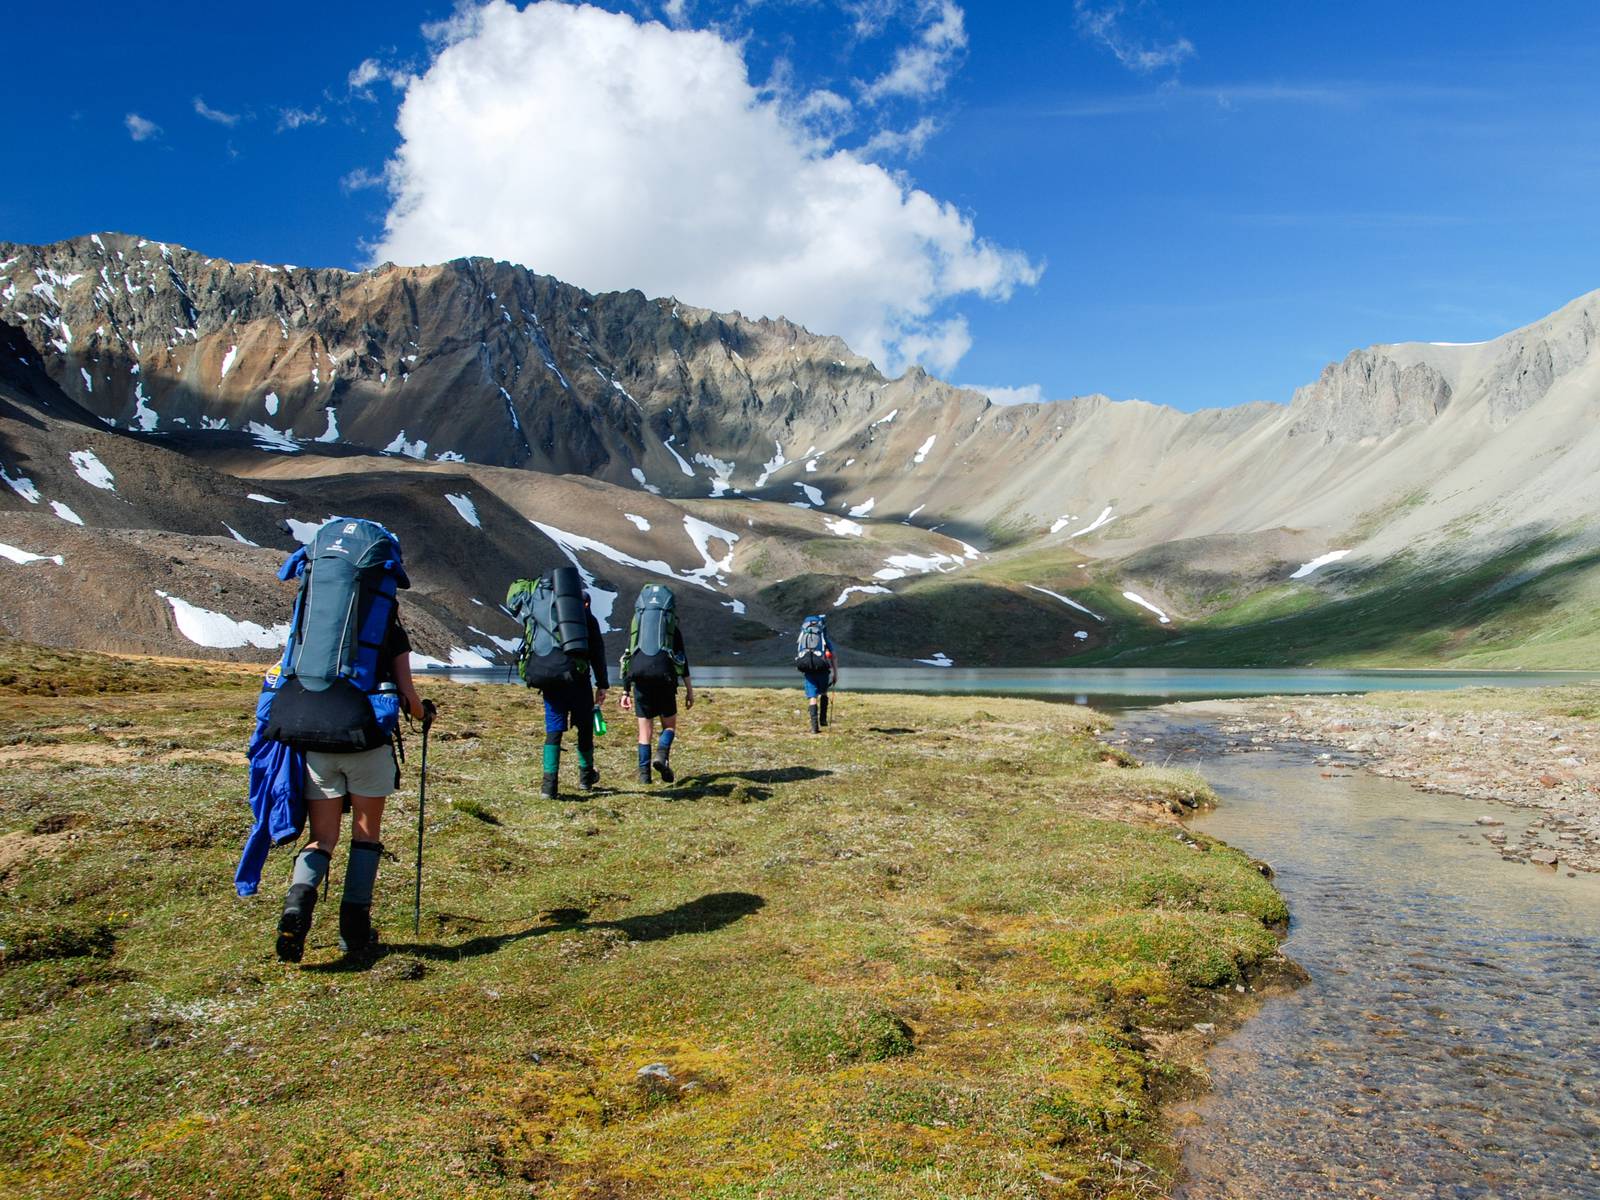 Group hiking across a green valley toward an alpine lake on a sunny day in Alaska